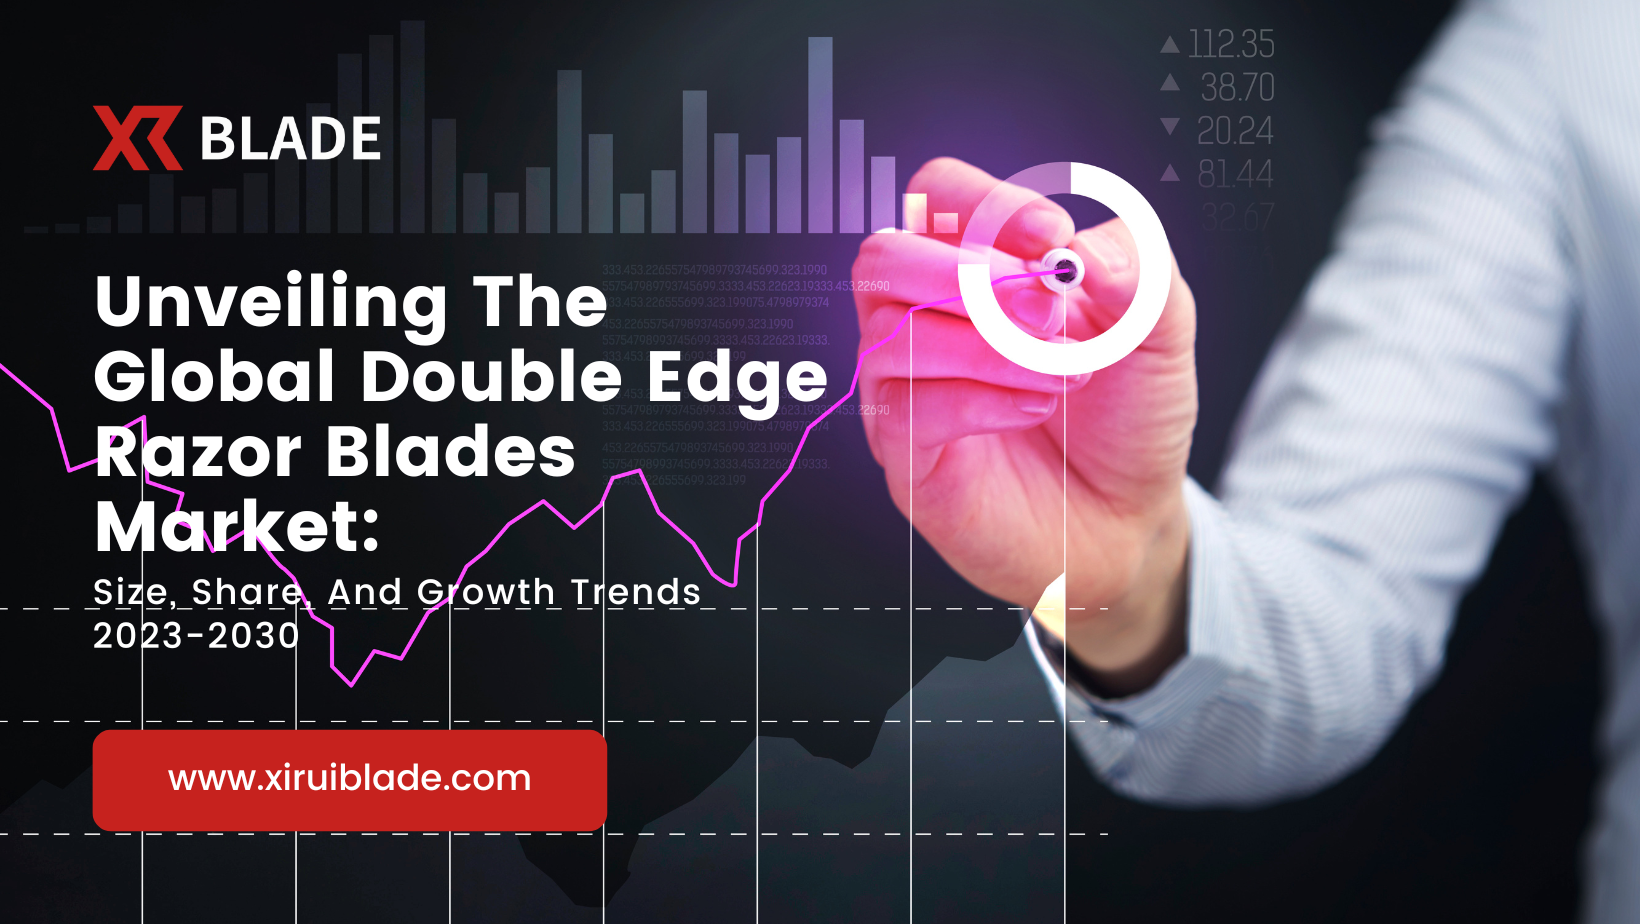 Unveiling the Global Double Edge Razor Blades Market: Size, Share, and Growth Trends 2023-2030